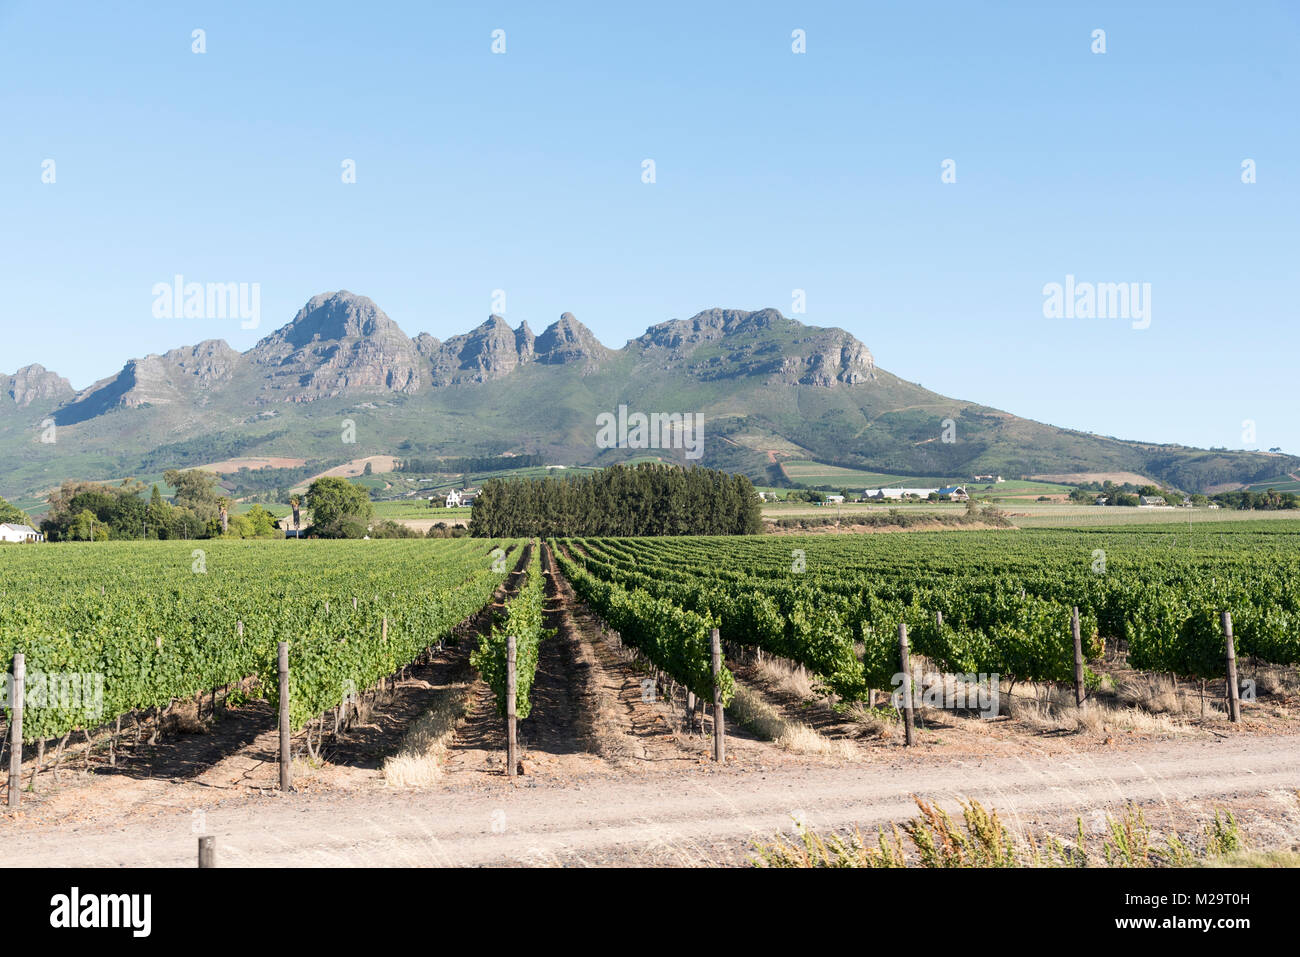 Vines at the foot of the Helderberg mountains between Stellenbosch and Somerset West in the Western Cape region of South Africa Stock Photo